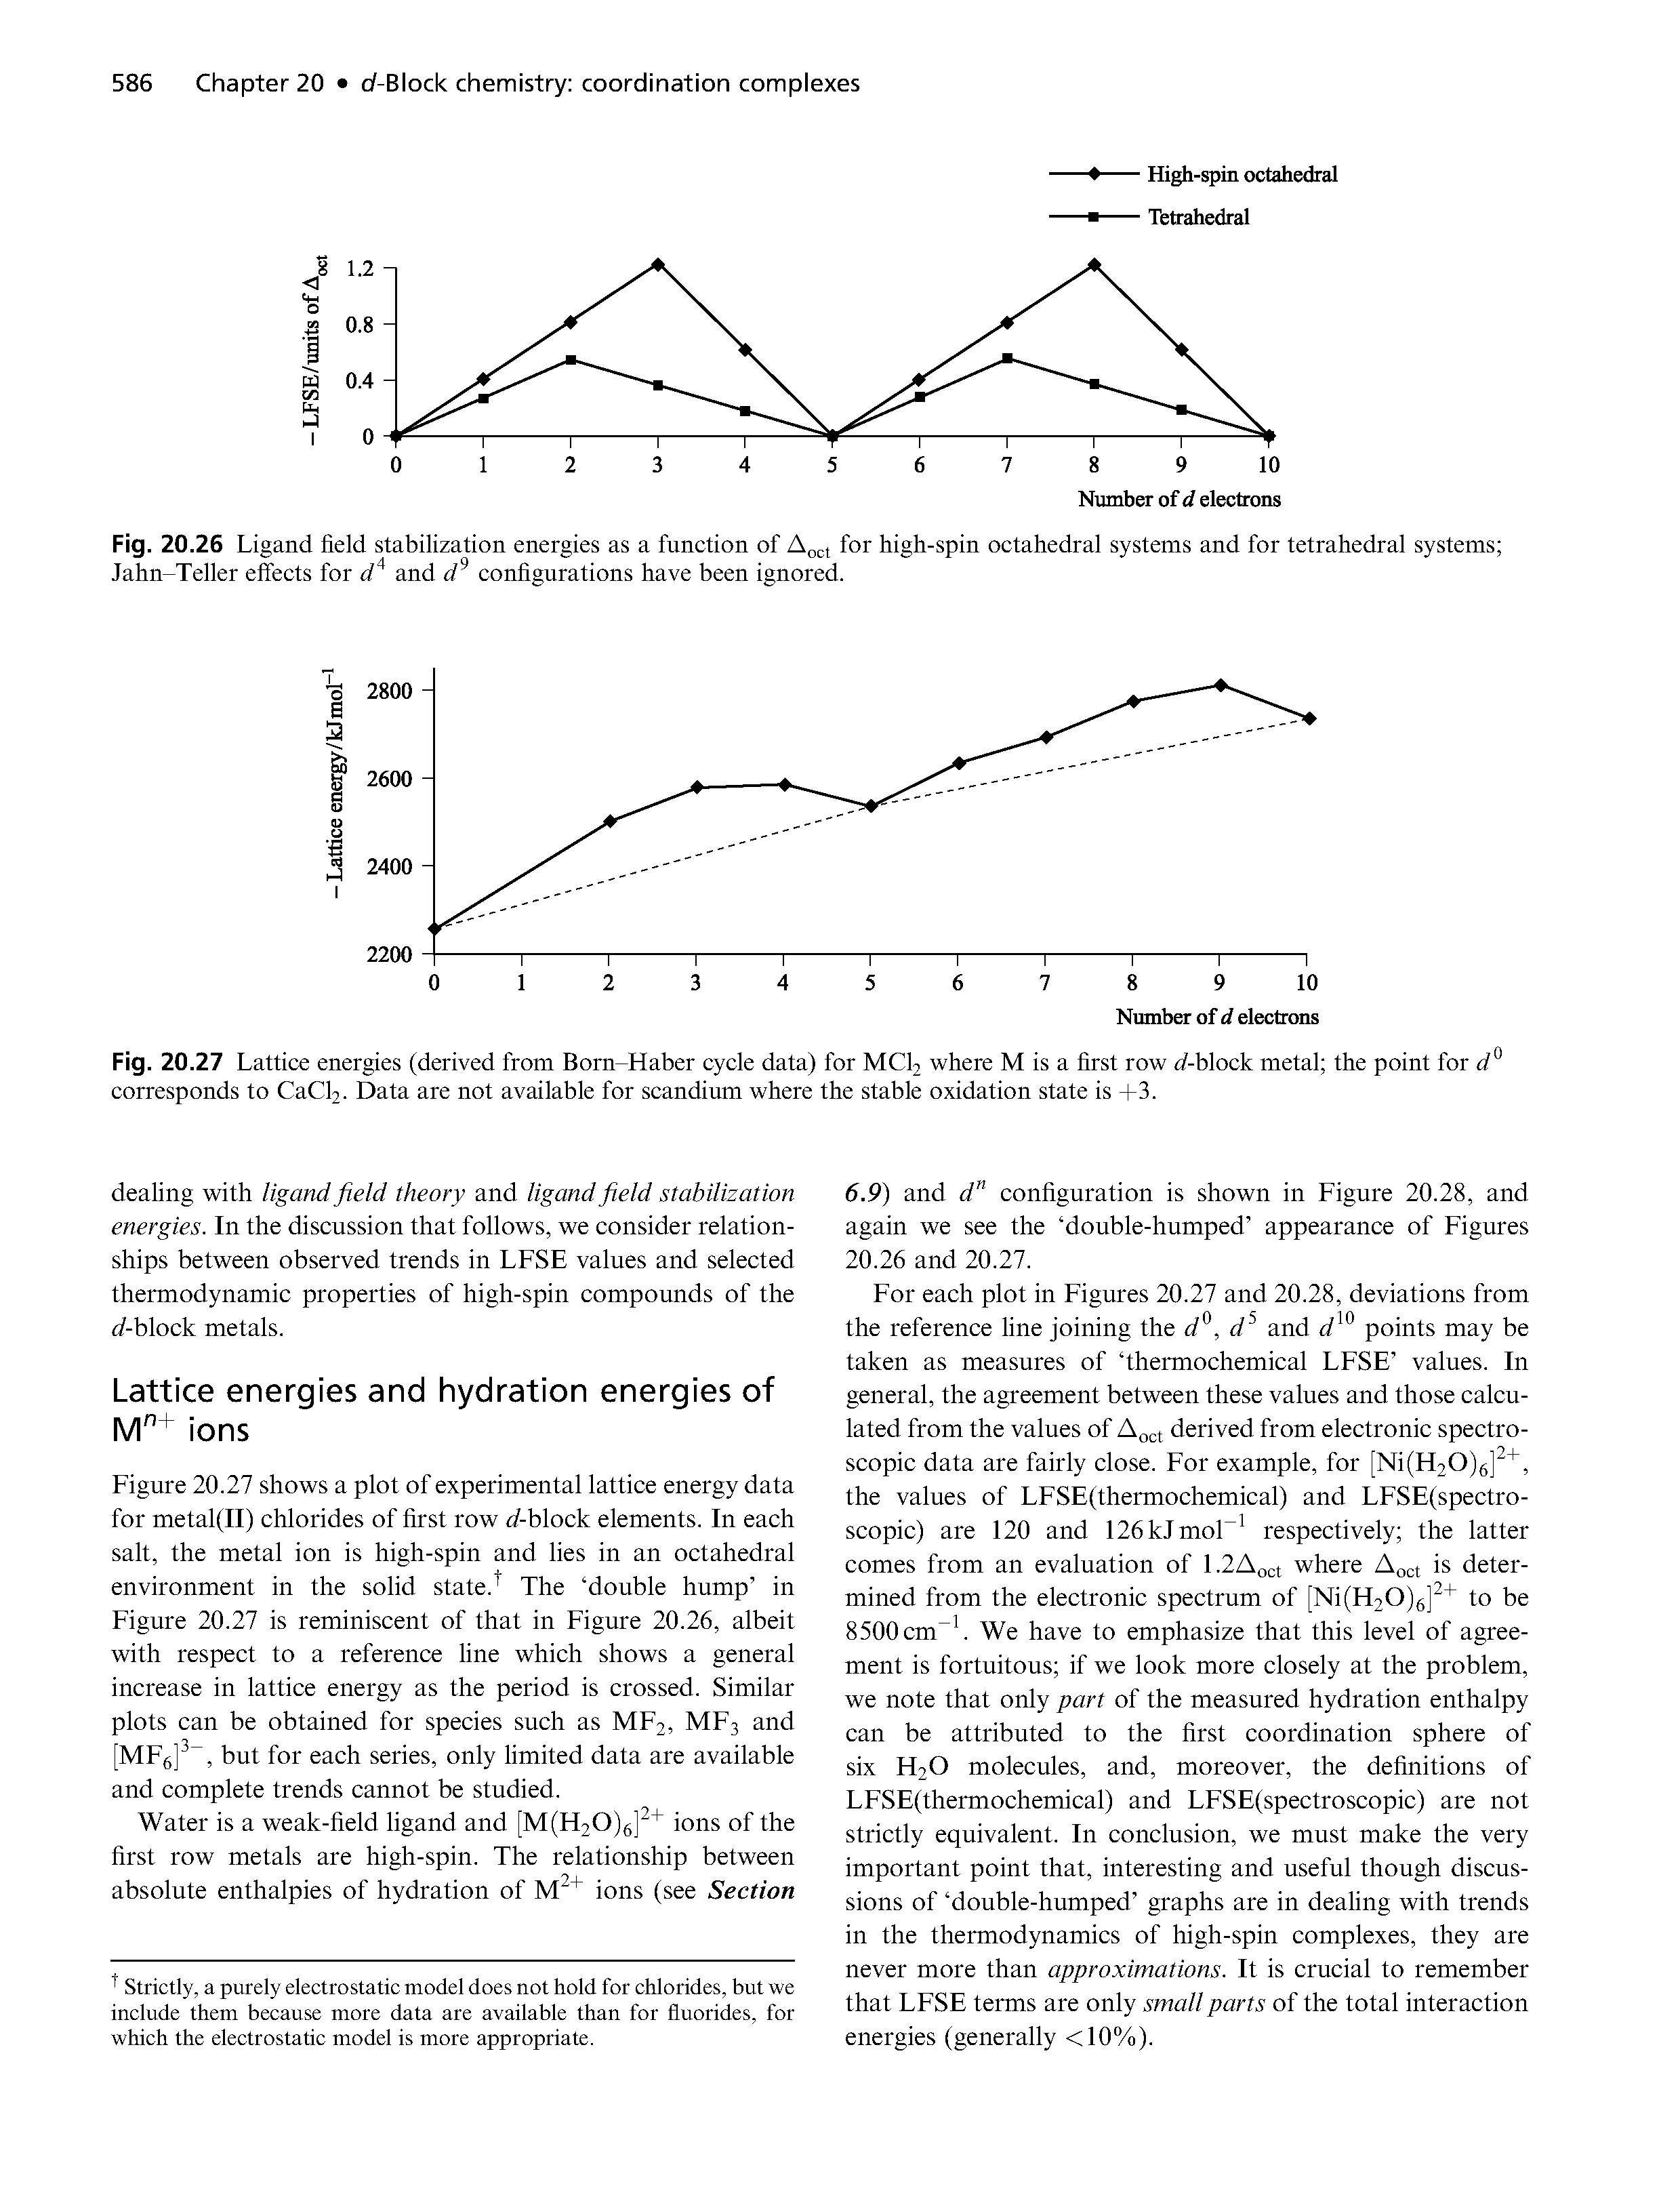 Fig. 20.26 Ligand field stabilization energies as a function of for high-spin octahedral systems and for tetrahedral systems Jahn-Teller effects for and configurations have been ignored.